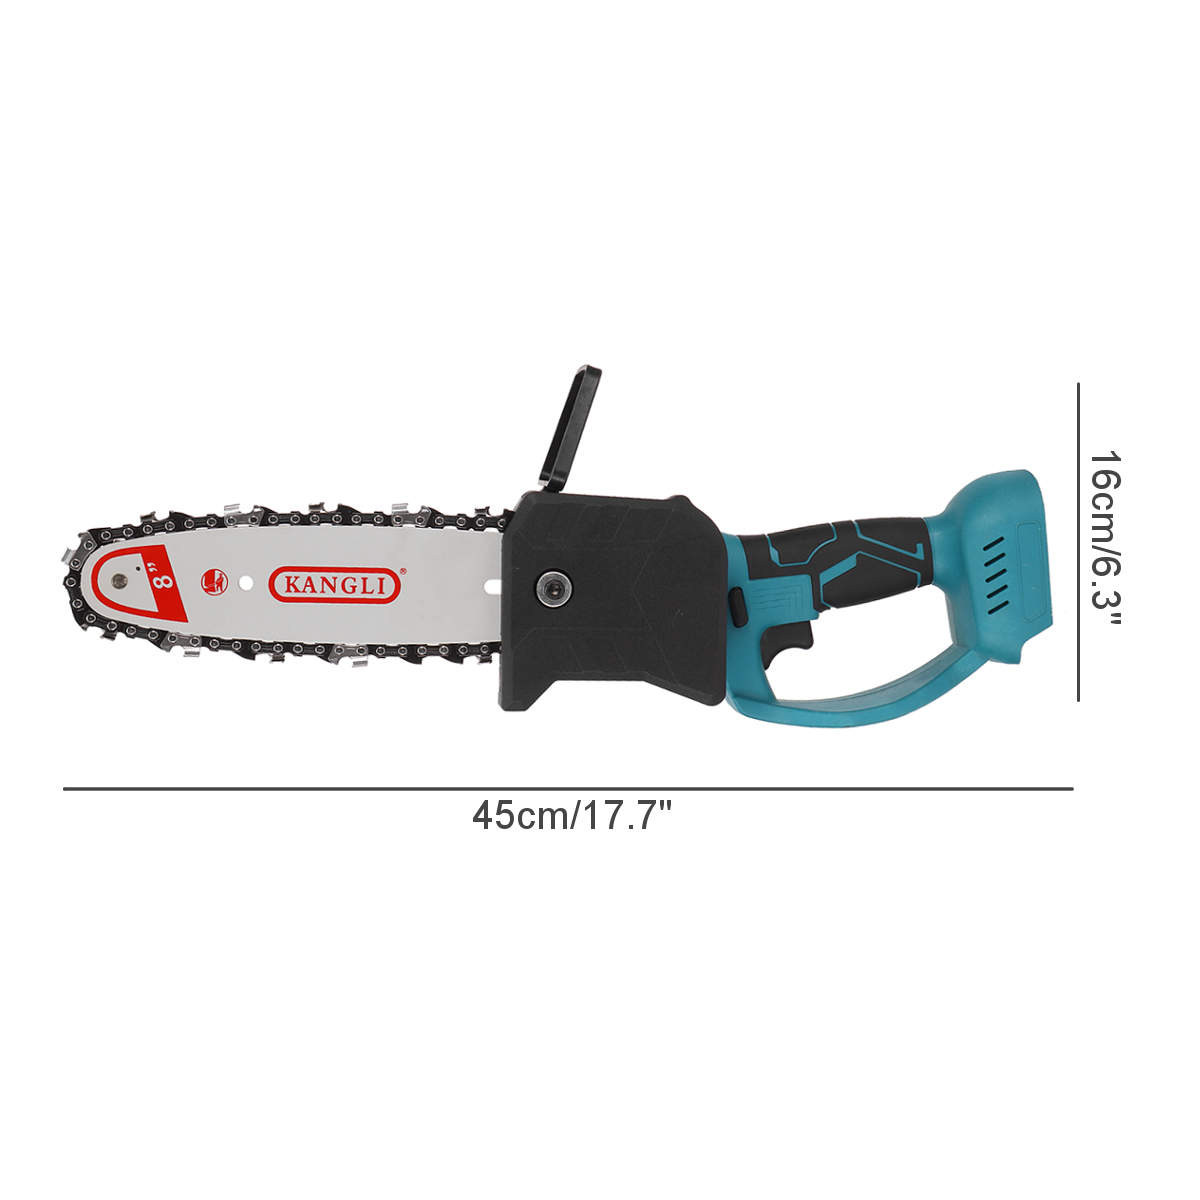 500W-8Inch-588VF-Cordless-Electric-Chainsaw-Multifunction-Chain-Saw-Woodworking-Tools-W-1pc2pcs-Batt-1824864-8